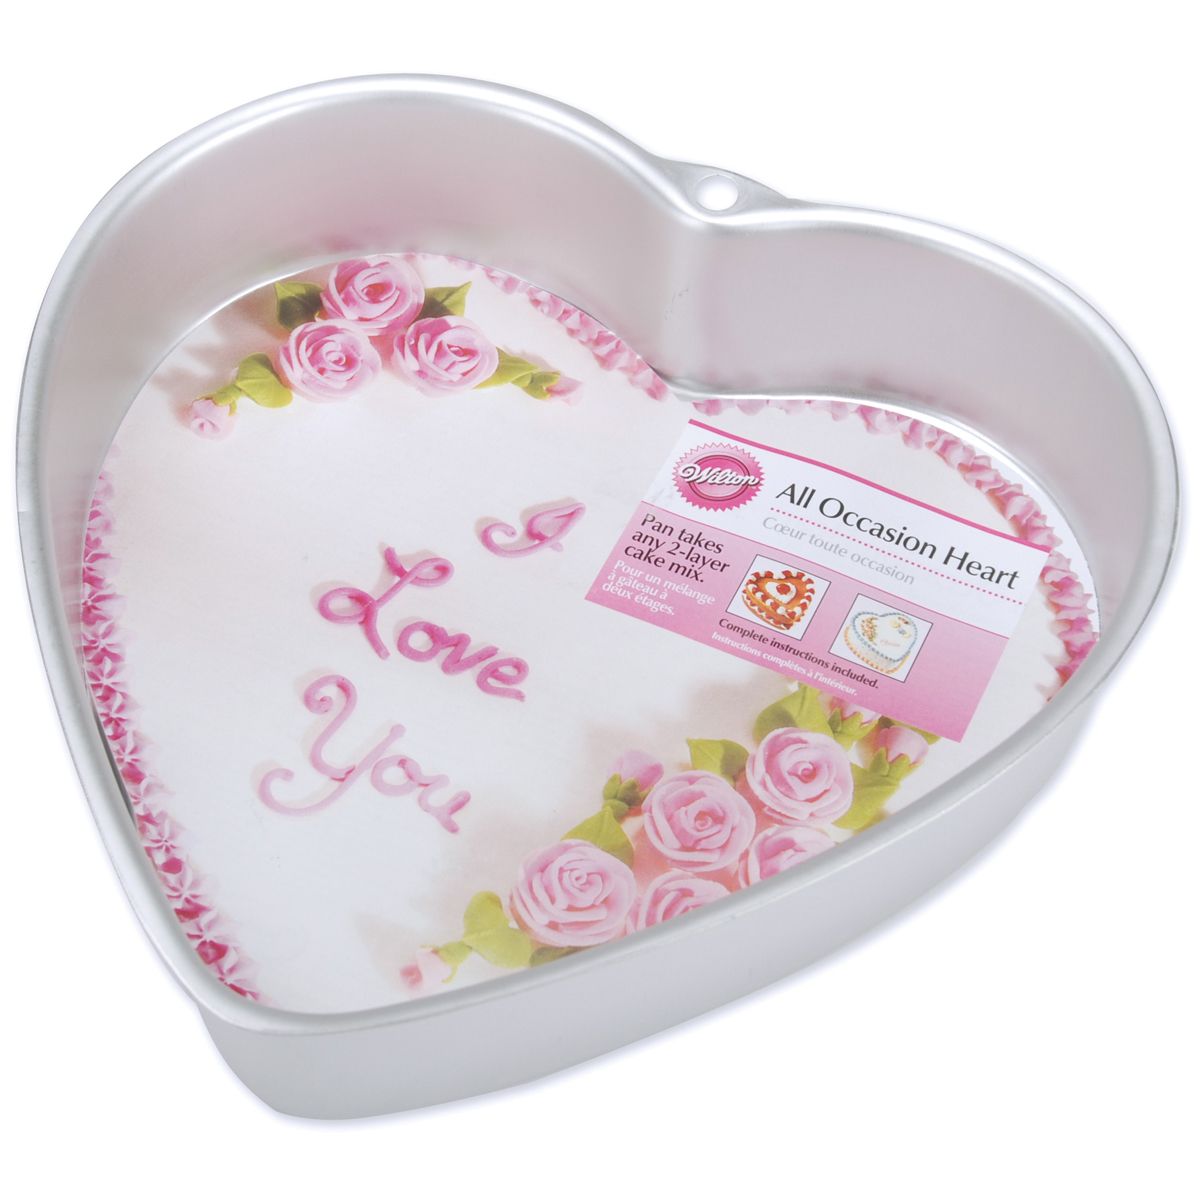 Cake Pan 9"x2" All Occasion Heart